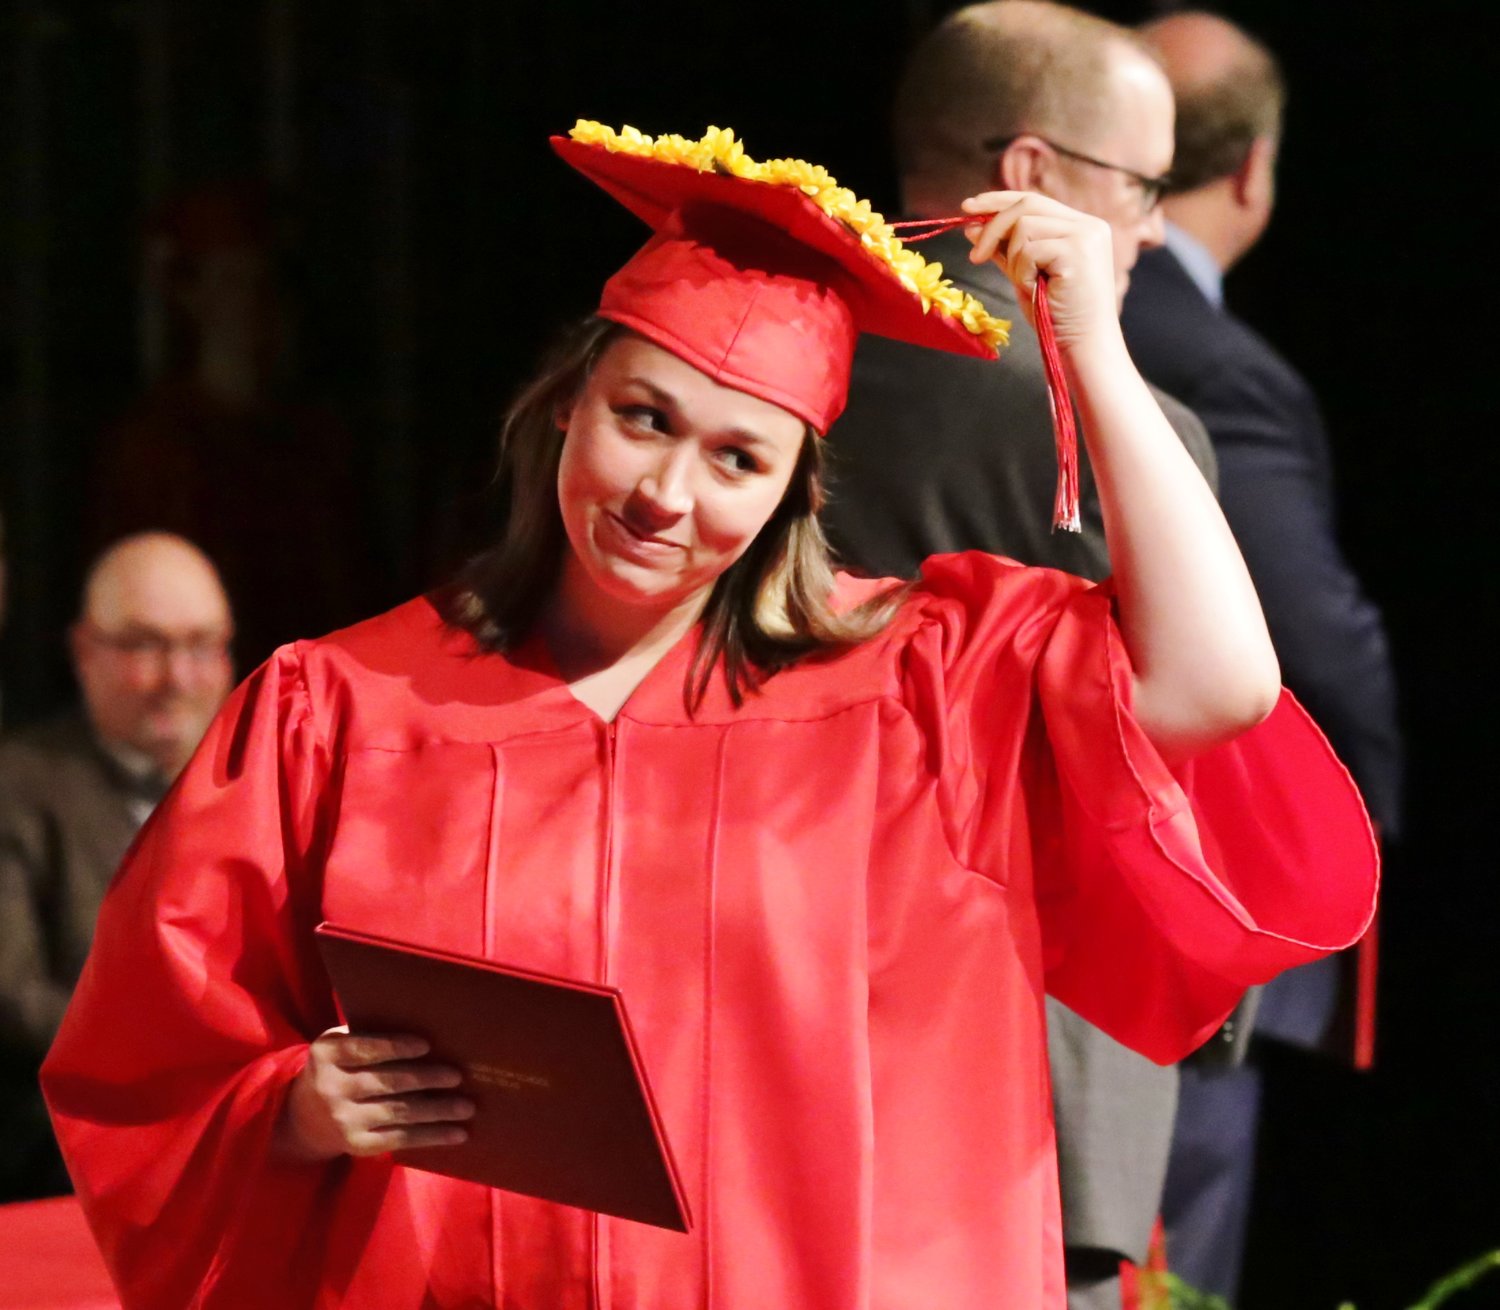 AGHS graduate Breanna Gallimore adjusts her tassel on her customized hat, while casting a glance to the crowd.